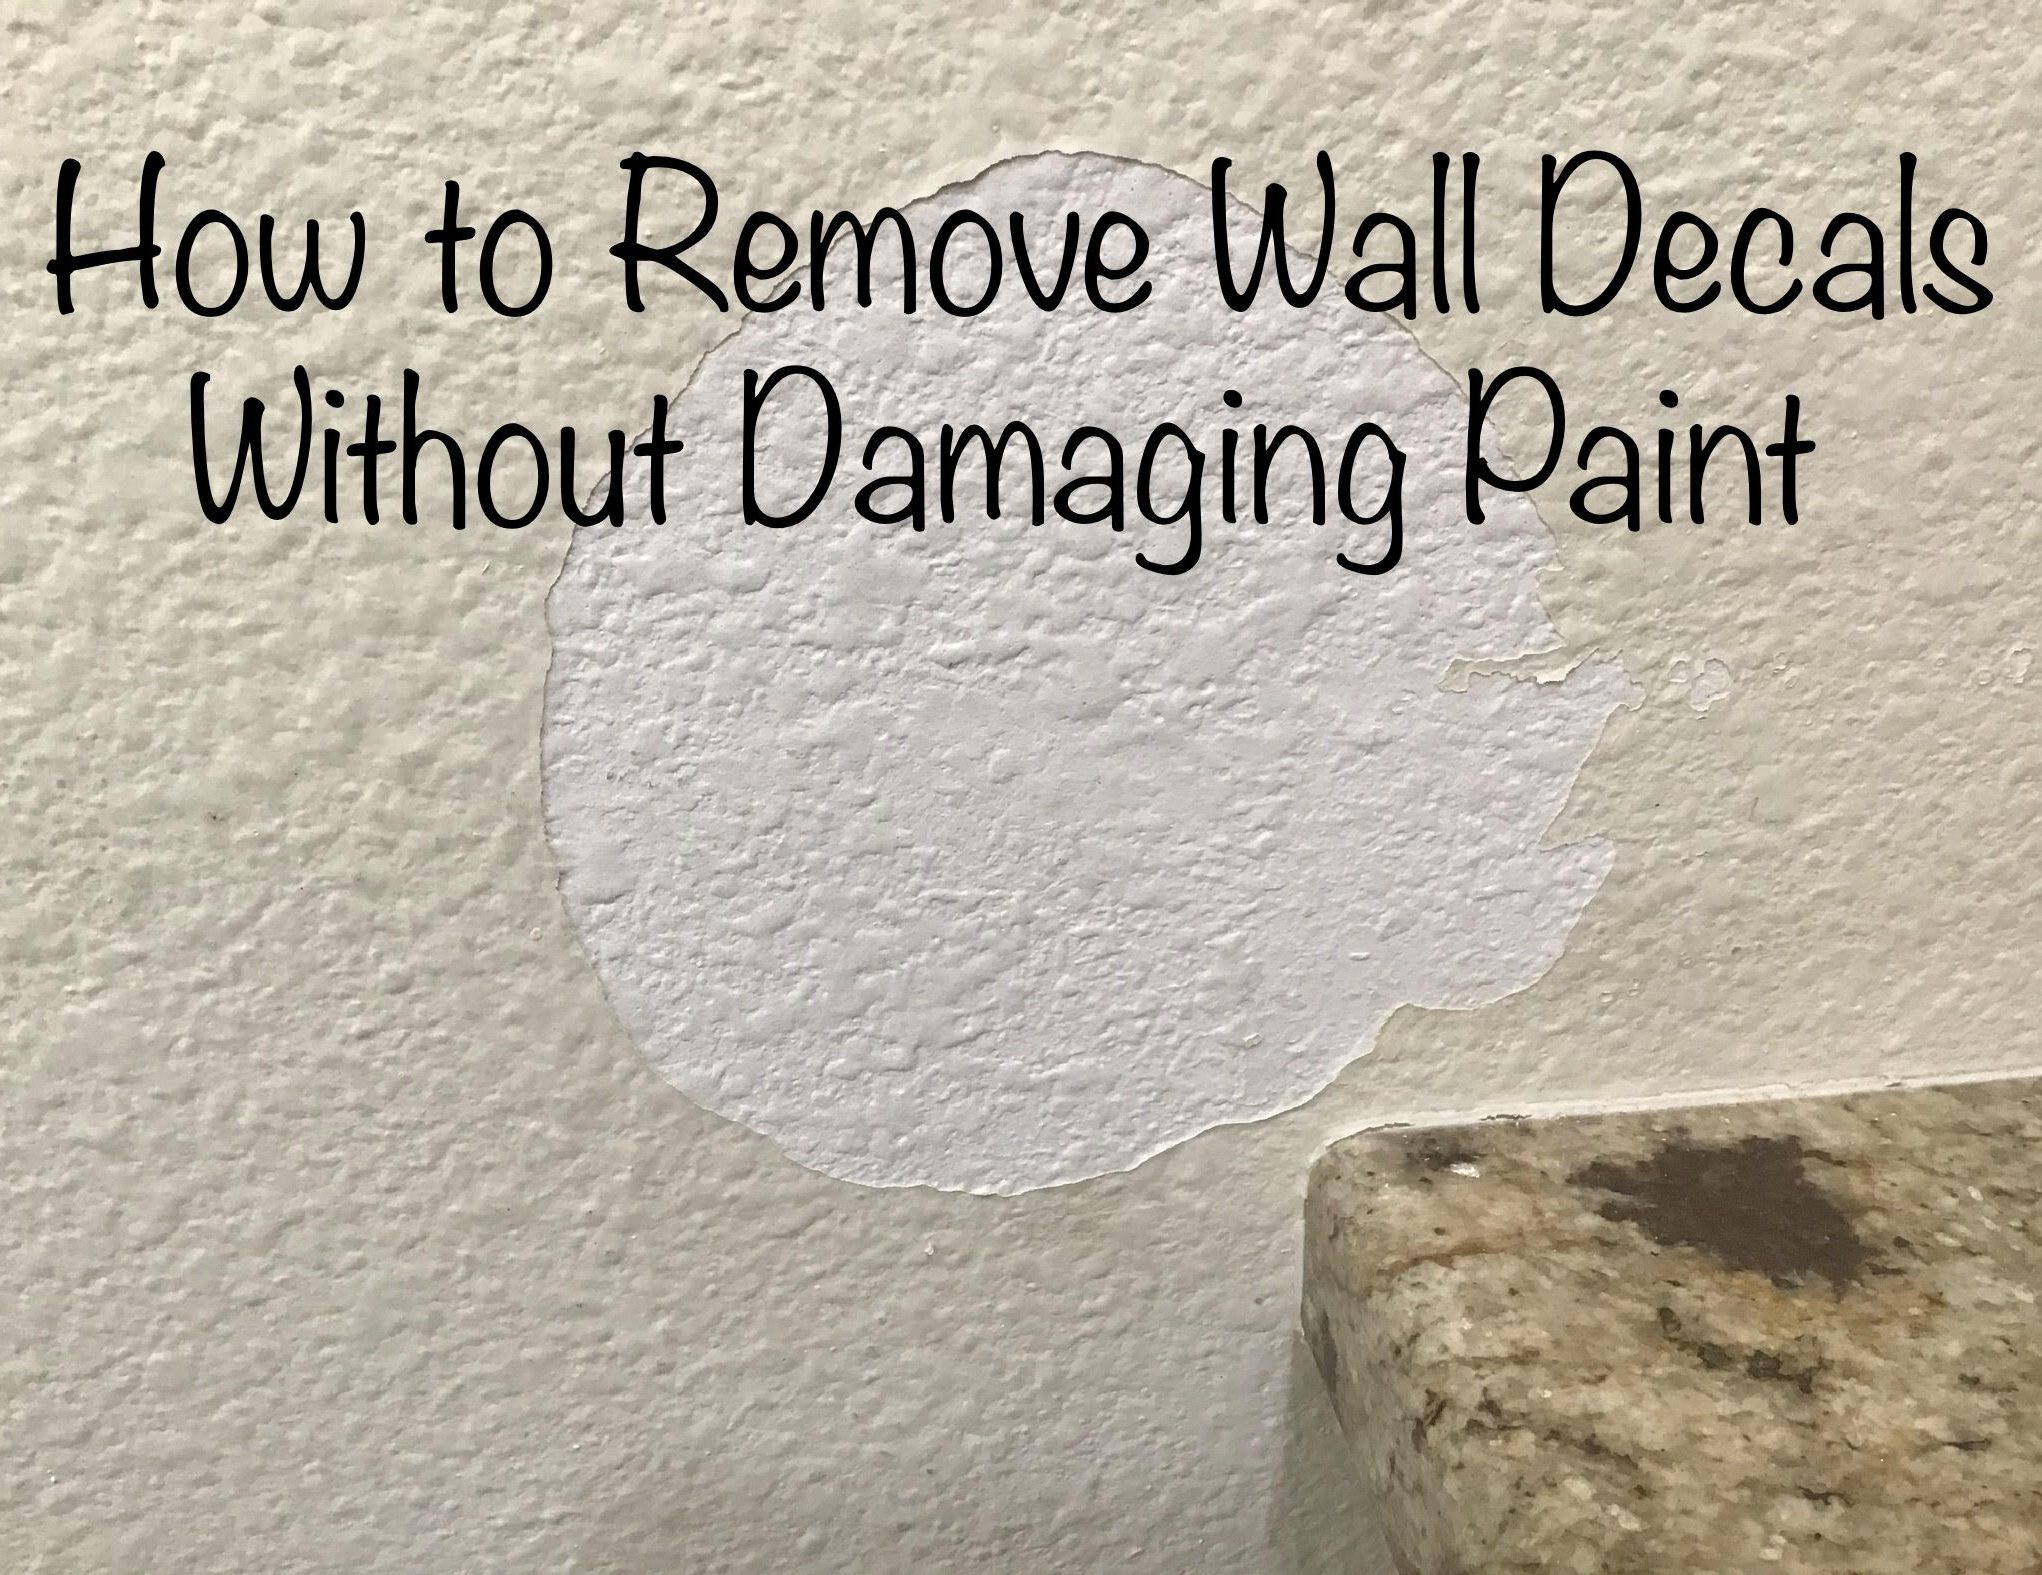 How to Remove Wall Decals Without Damaging Paint • Vinyl Wall Expressions